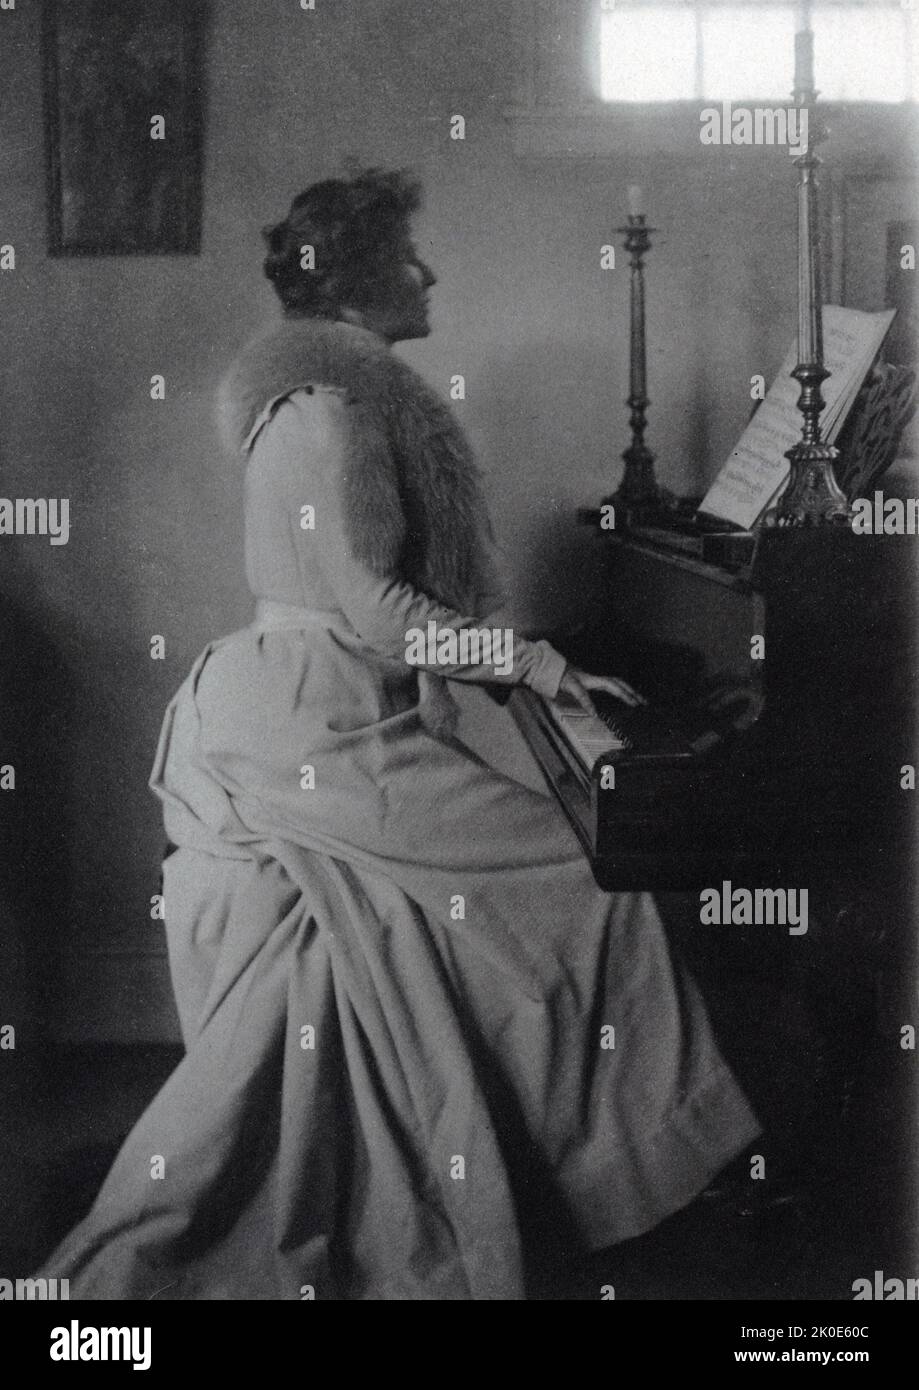 Agnes Lee playing piano, by Fred Holland Day (1864--1933), American photographer and publisher. He was prominent in literary and photography circles in the late 19th century and was a leading Pictorialist. He was an early and vocal advocate for accepting photography as a fine art. Agnes Lee (nee Martha Agnes Rand; 1868 - 1939) was an American poet and translator. Stock Photo